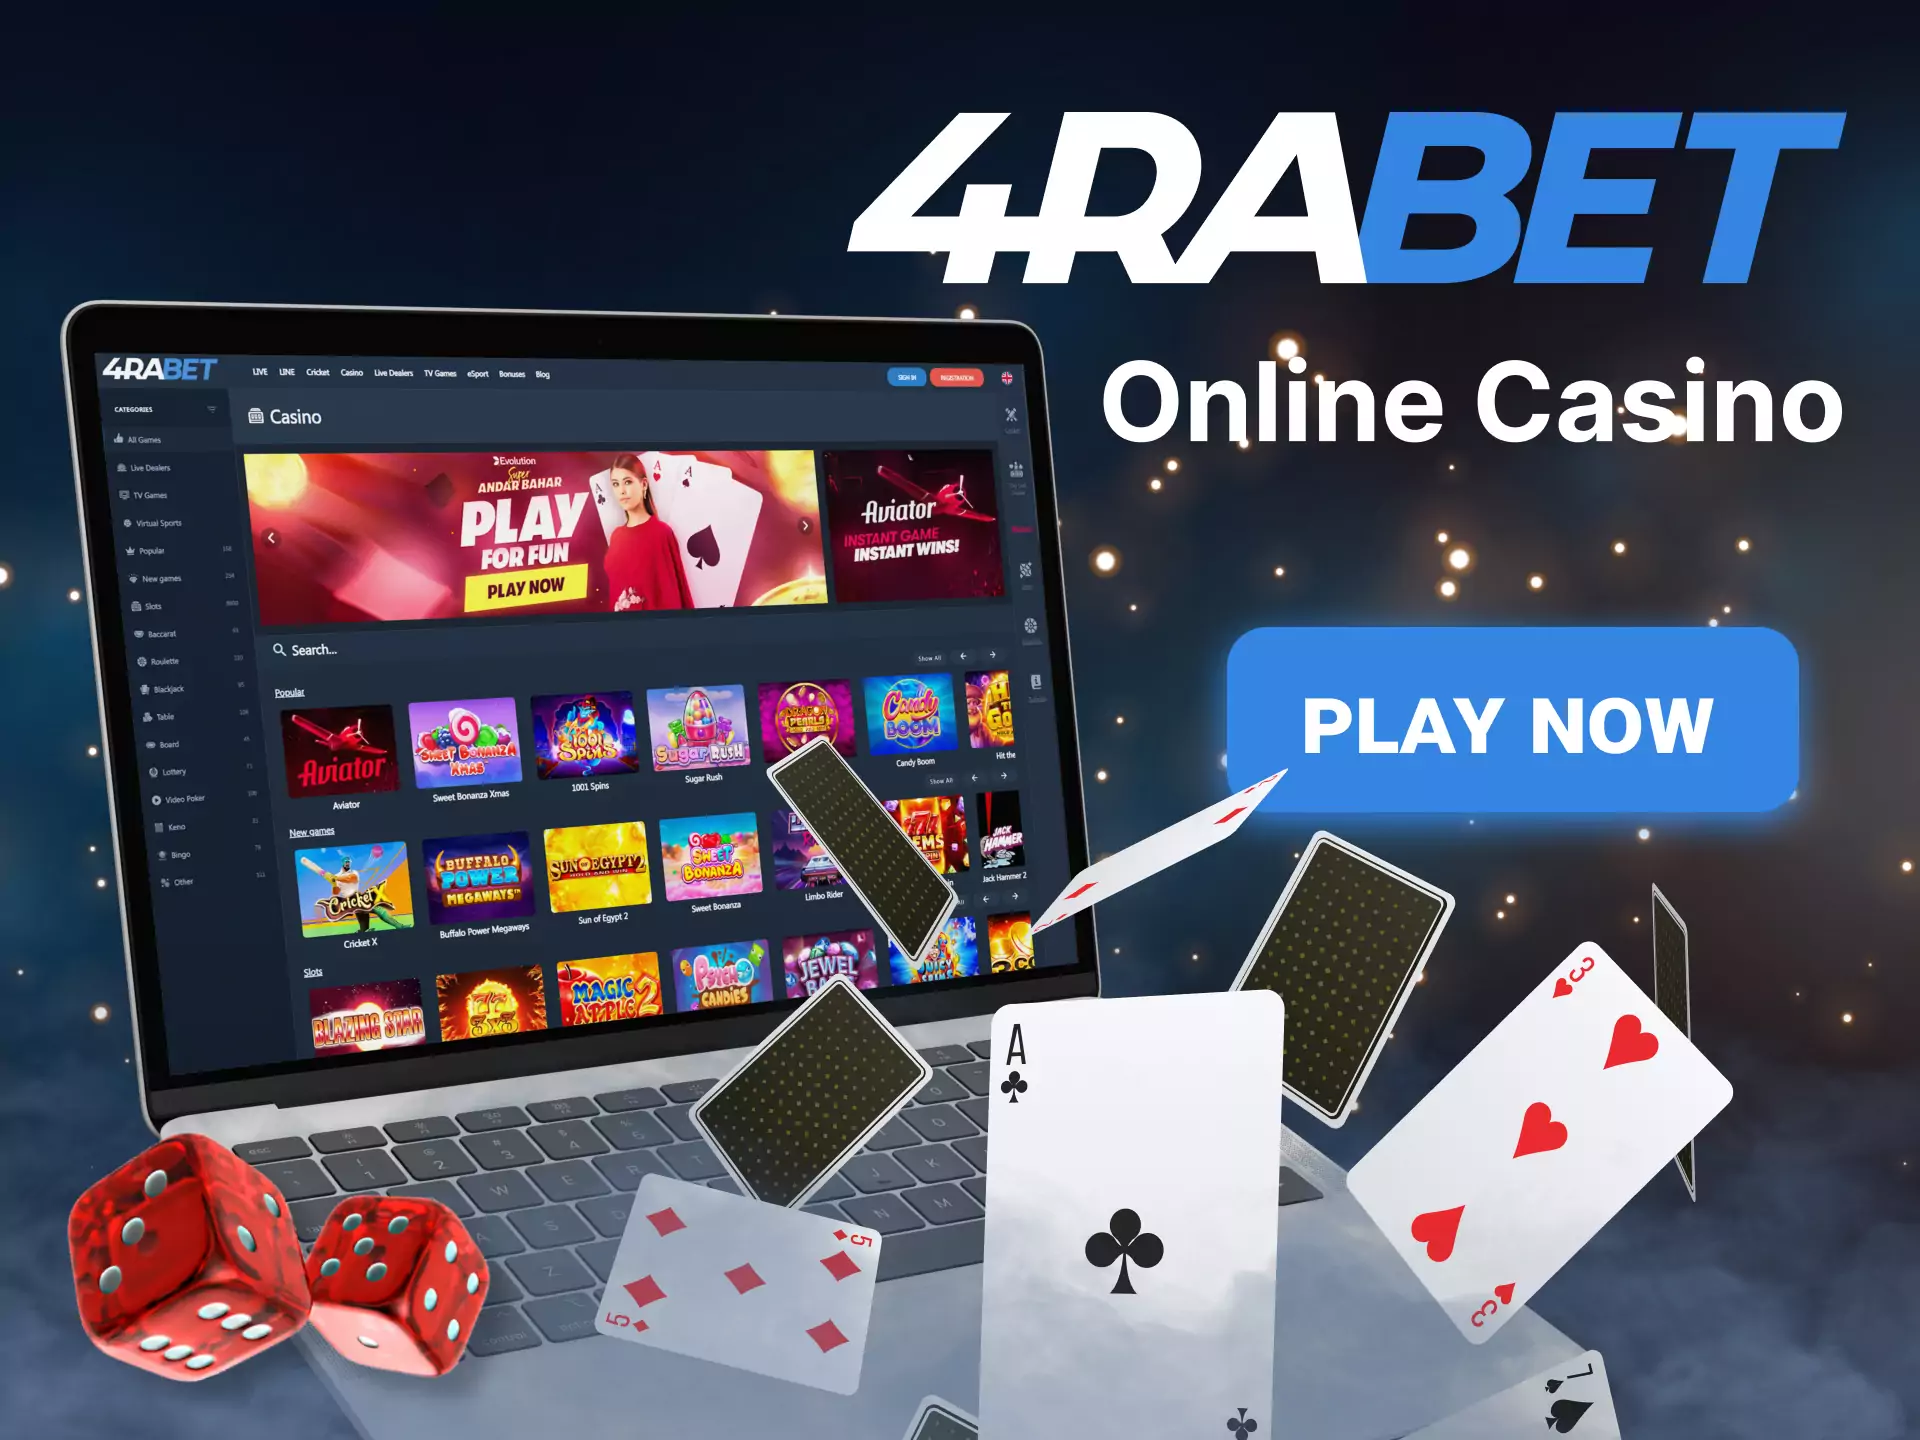 Play the online casino 4rabet and win.